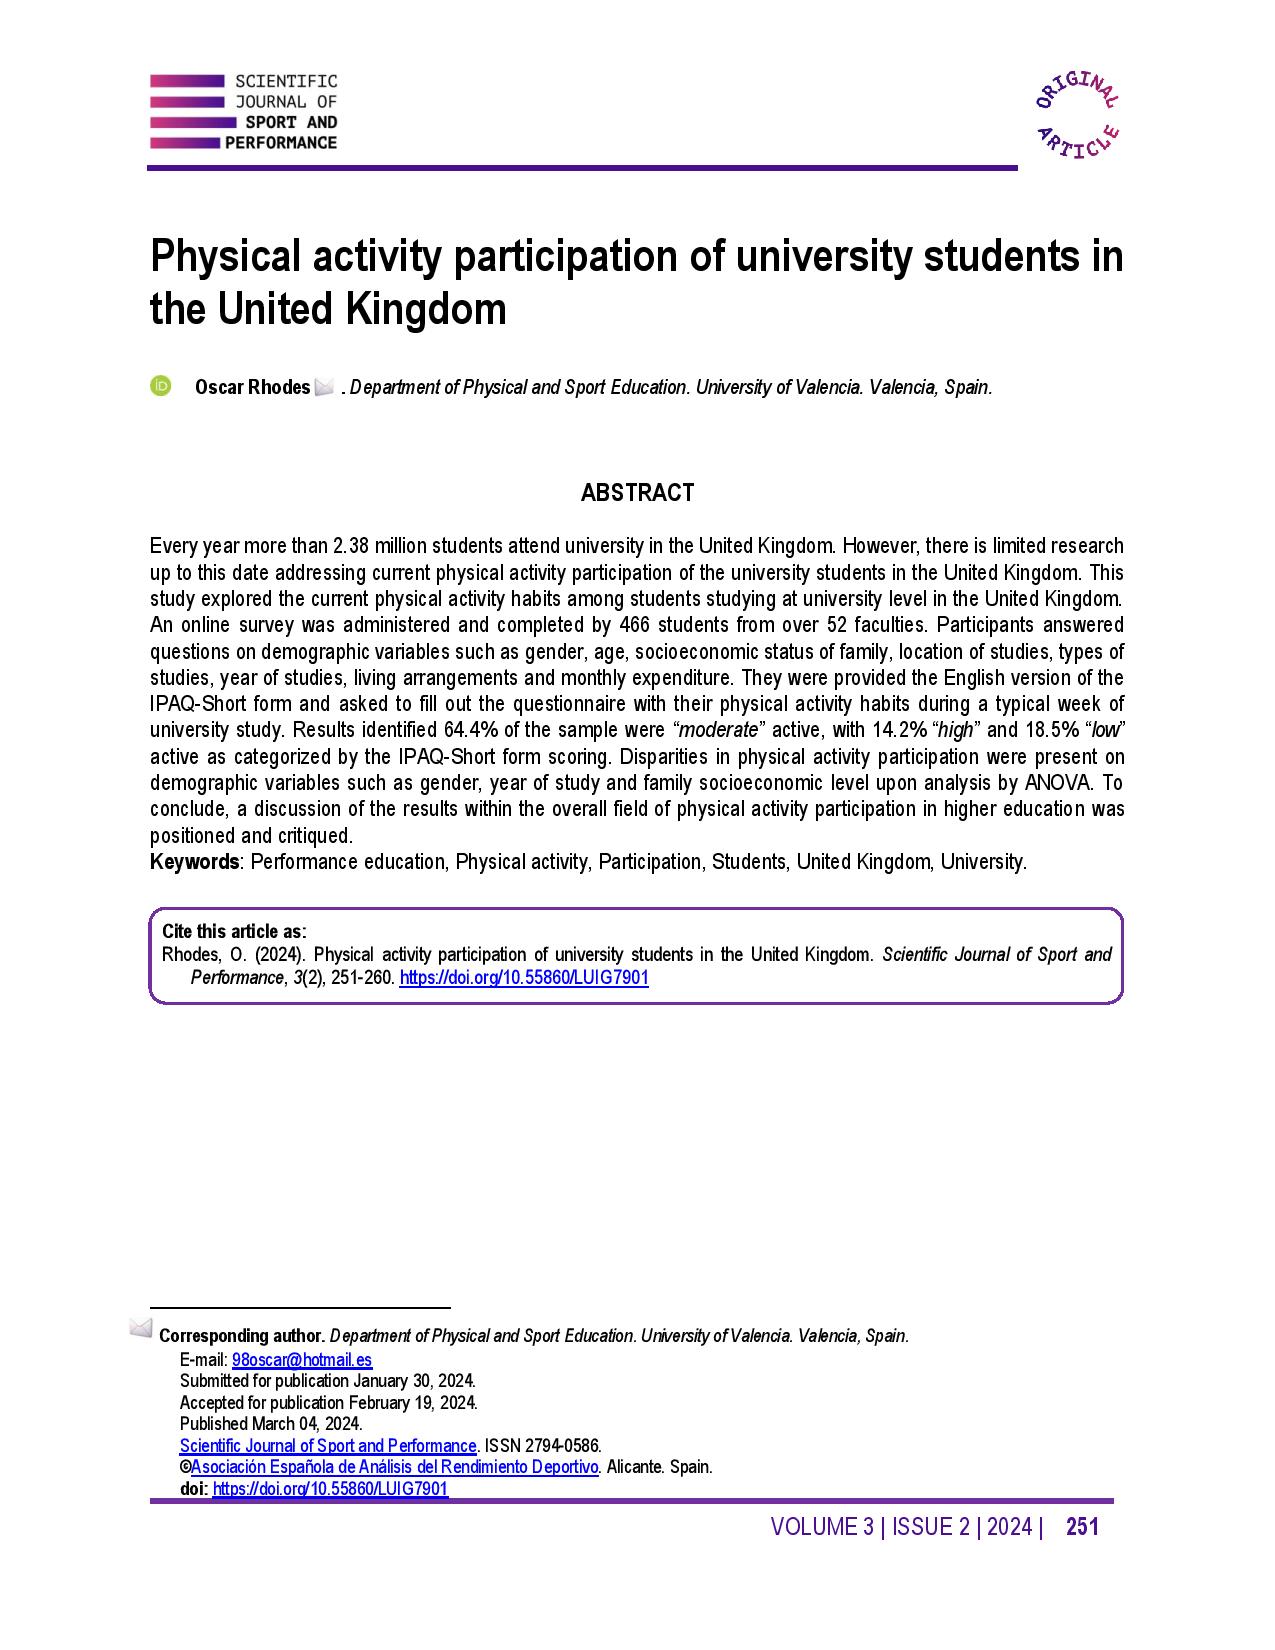 Physical activity participation of university students in the United Kingdom